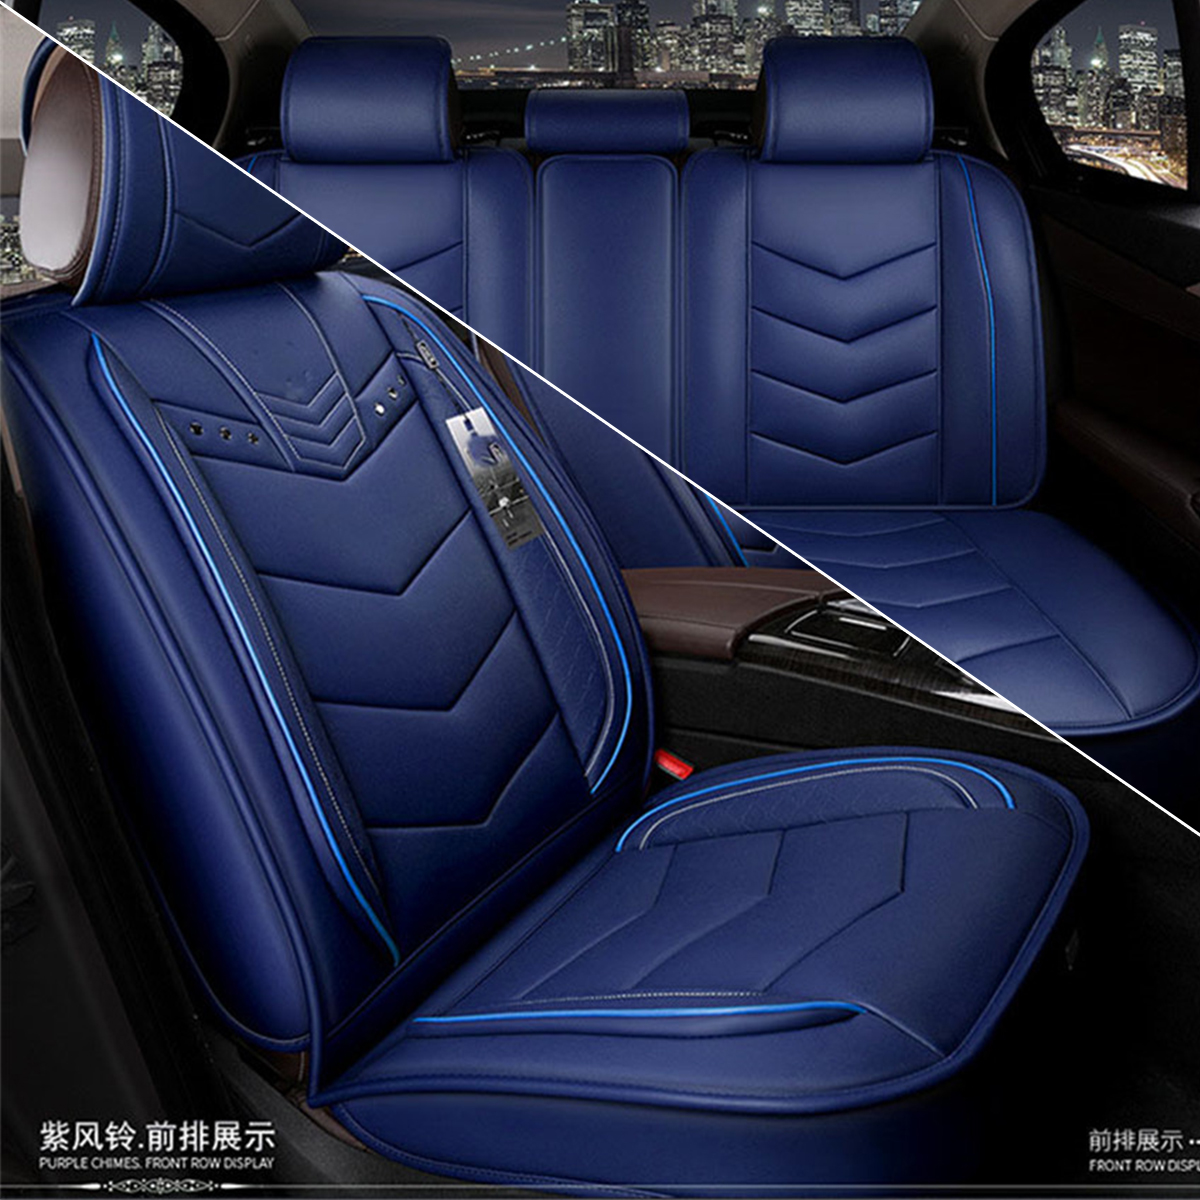 Details About Blue Leather 5 Seat Full Surrounded Seat Cushion Cover Protection For Car Suv